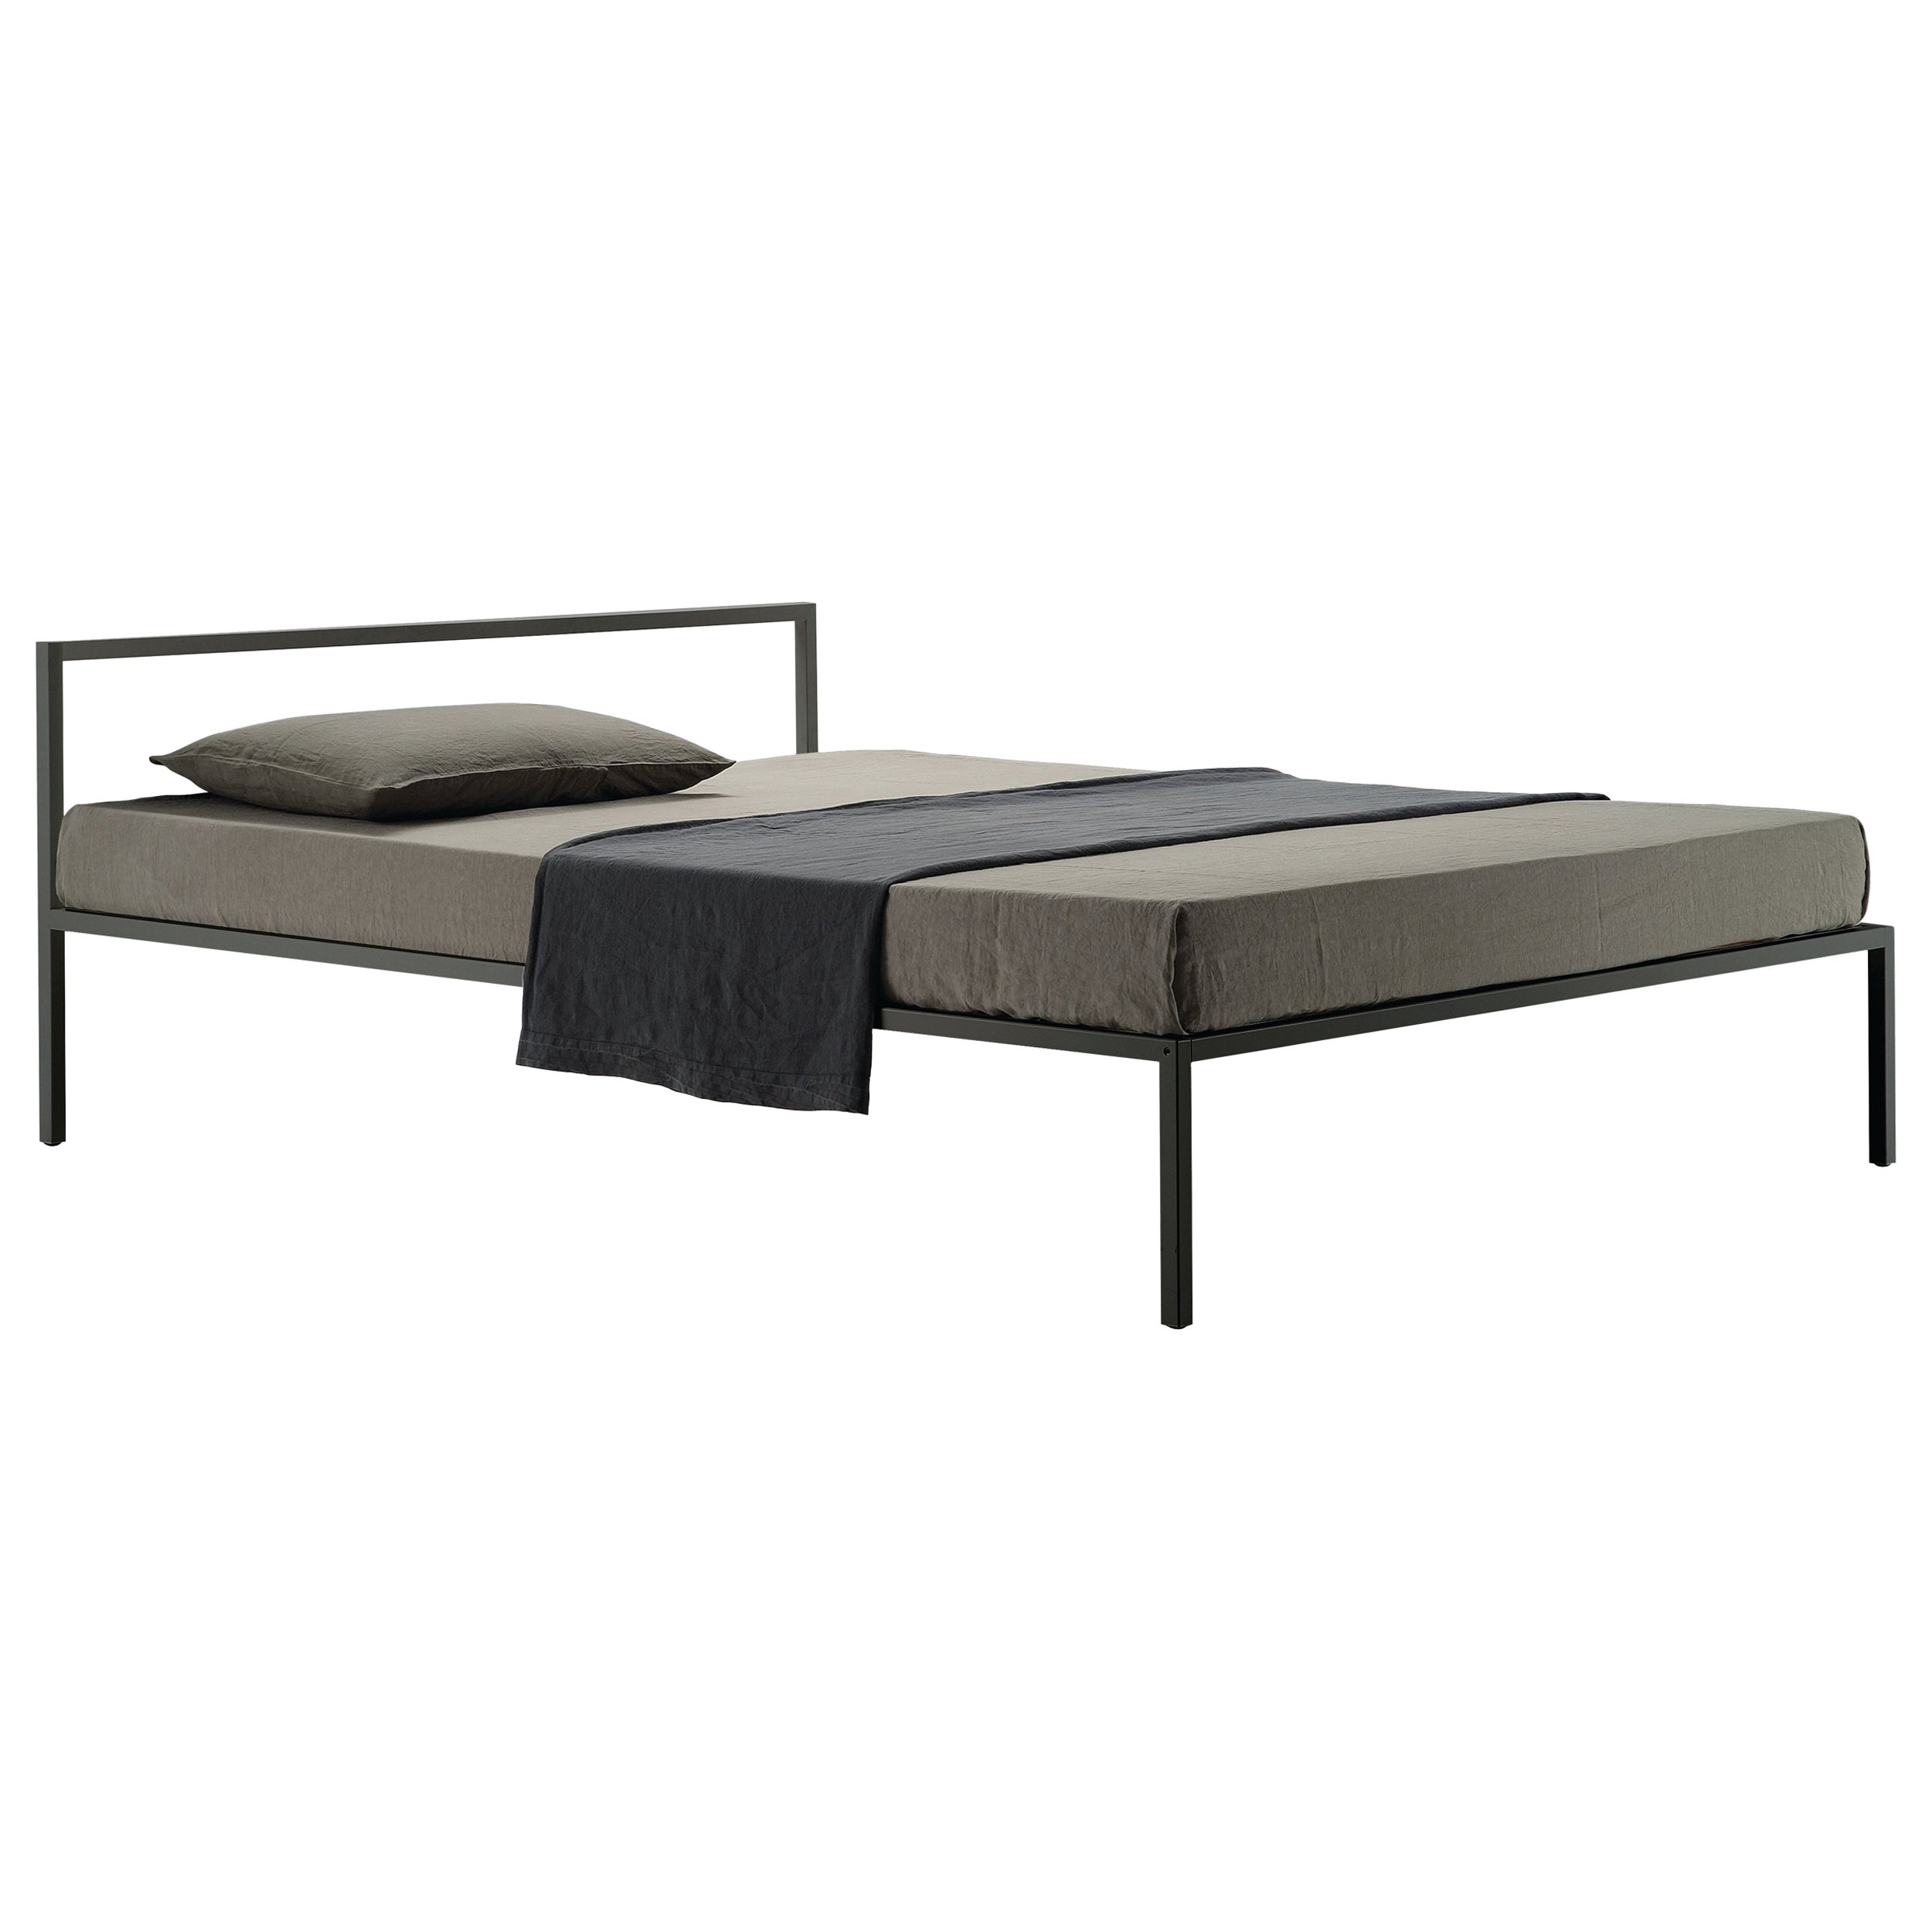 Zanotta Medium Nyx Bed Frame in Black Painted Steel by Emaf Progetti